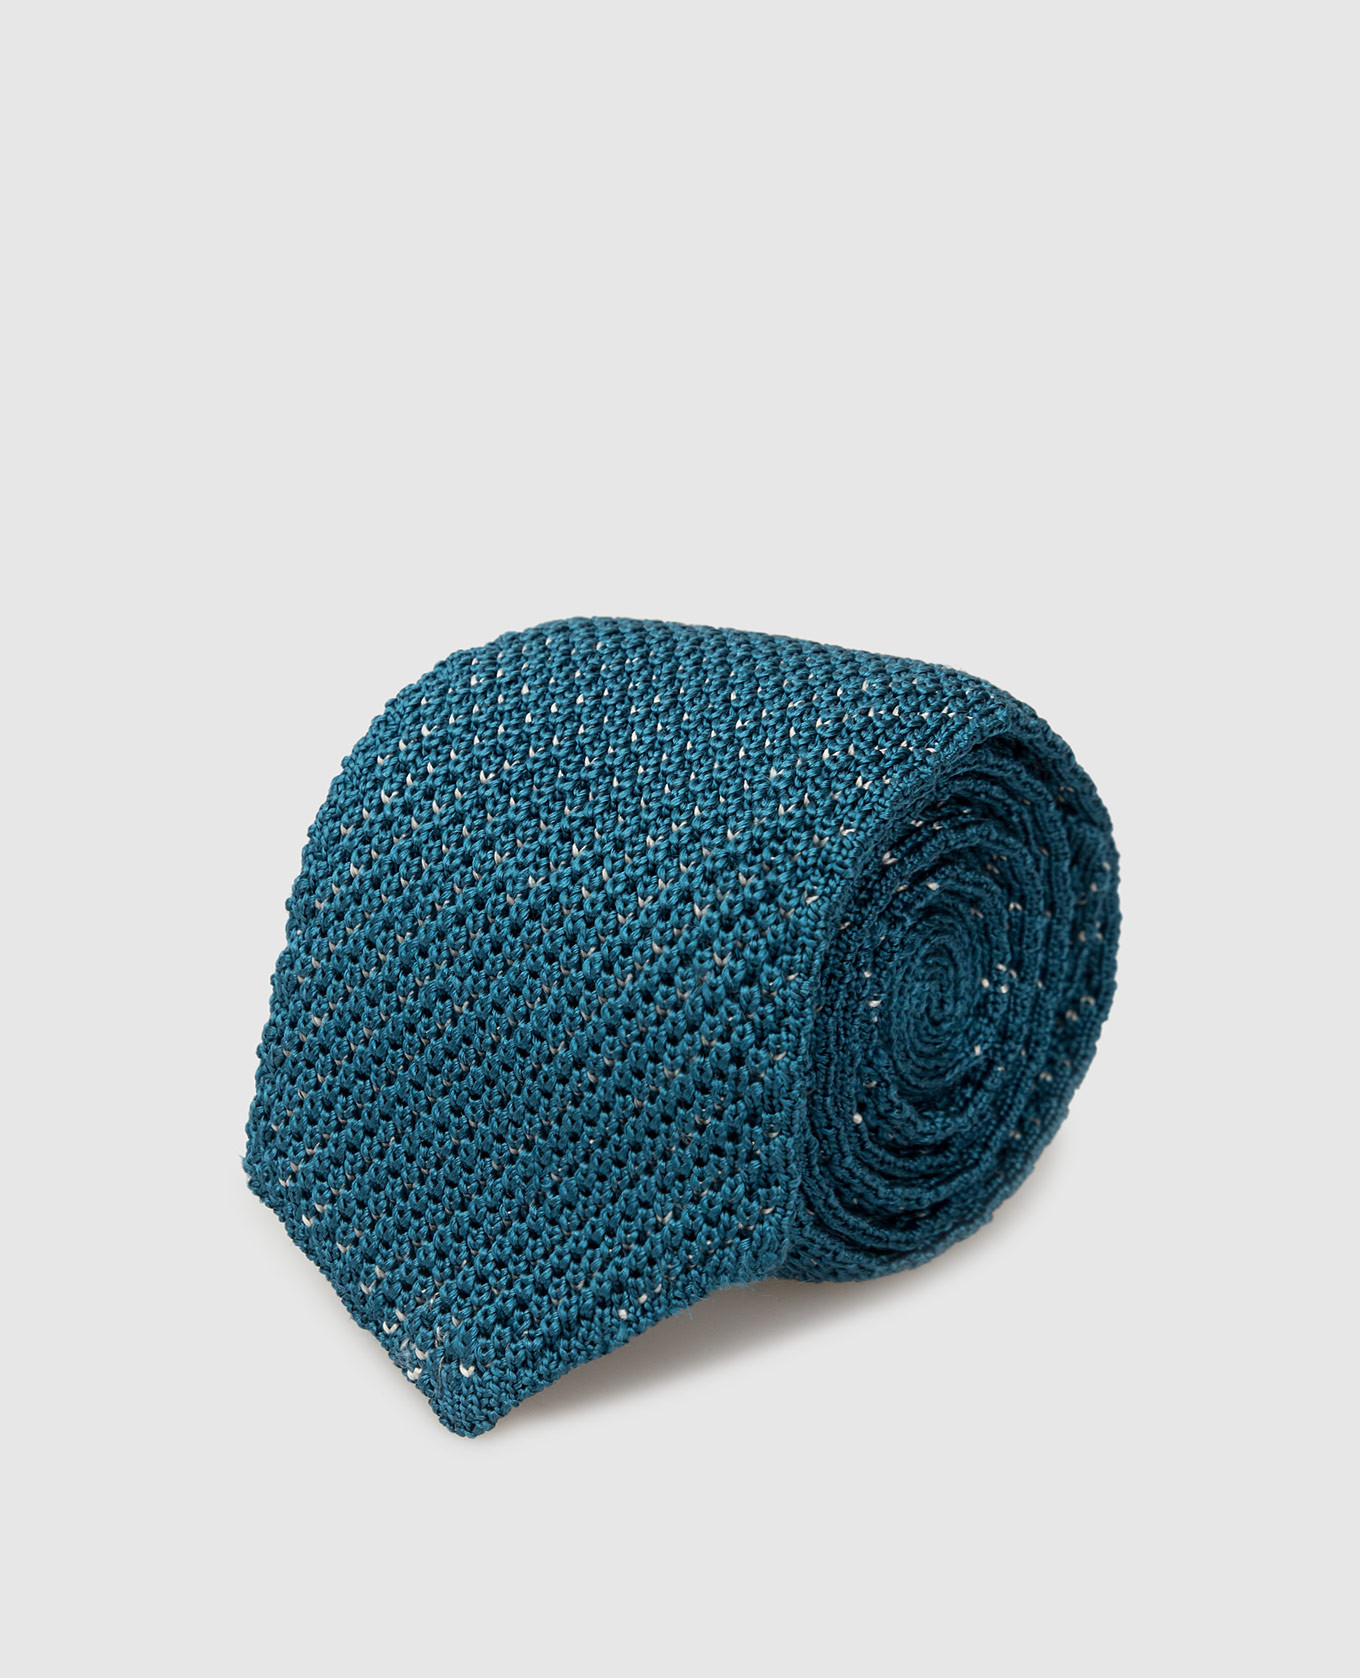 Children's turquoise patterned silk tie